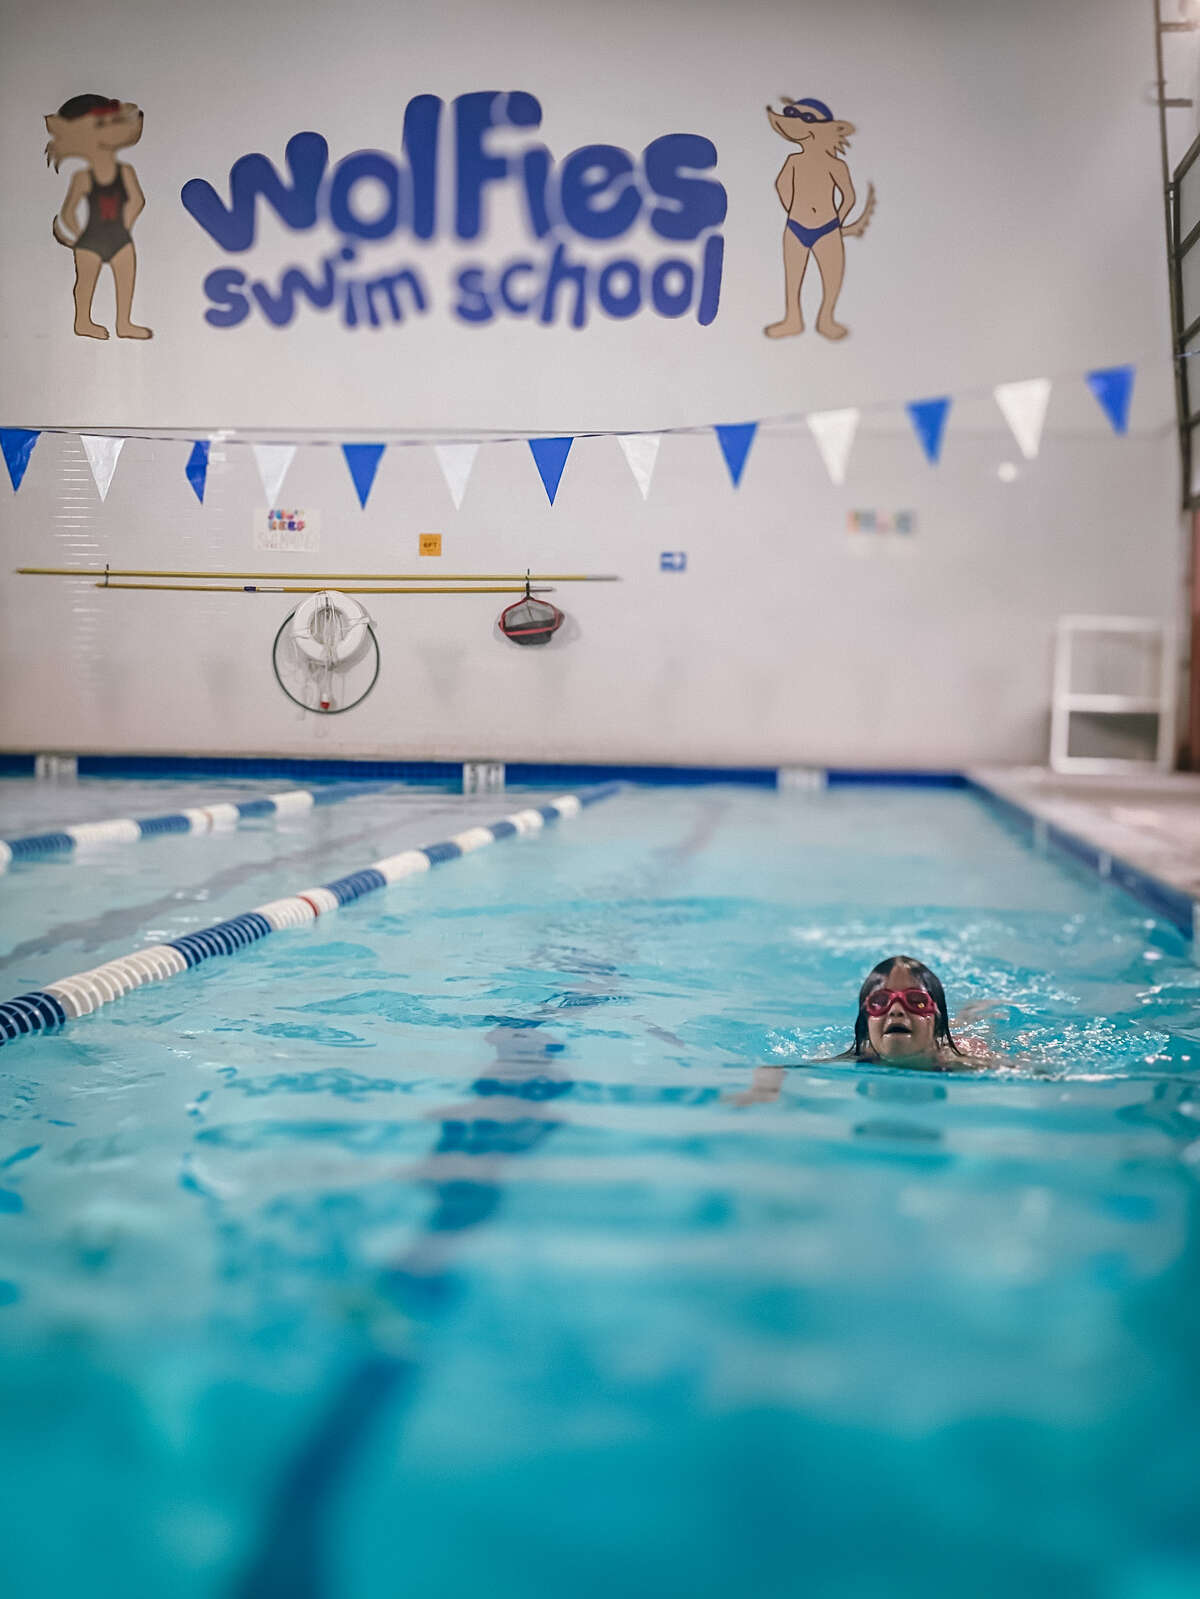 Wolfies Swim School is planning to open a second location in Spring Branch. The Bellaire location, pictured, opened in 2017.